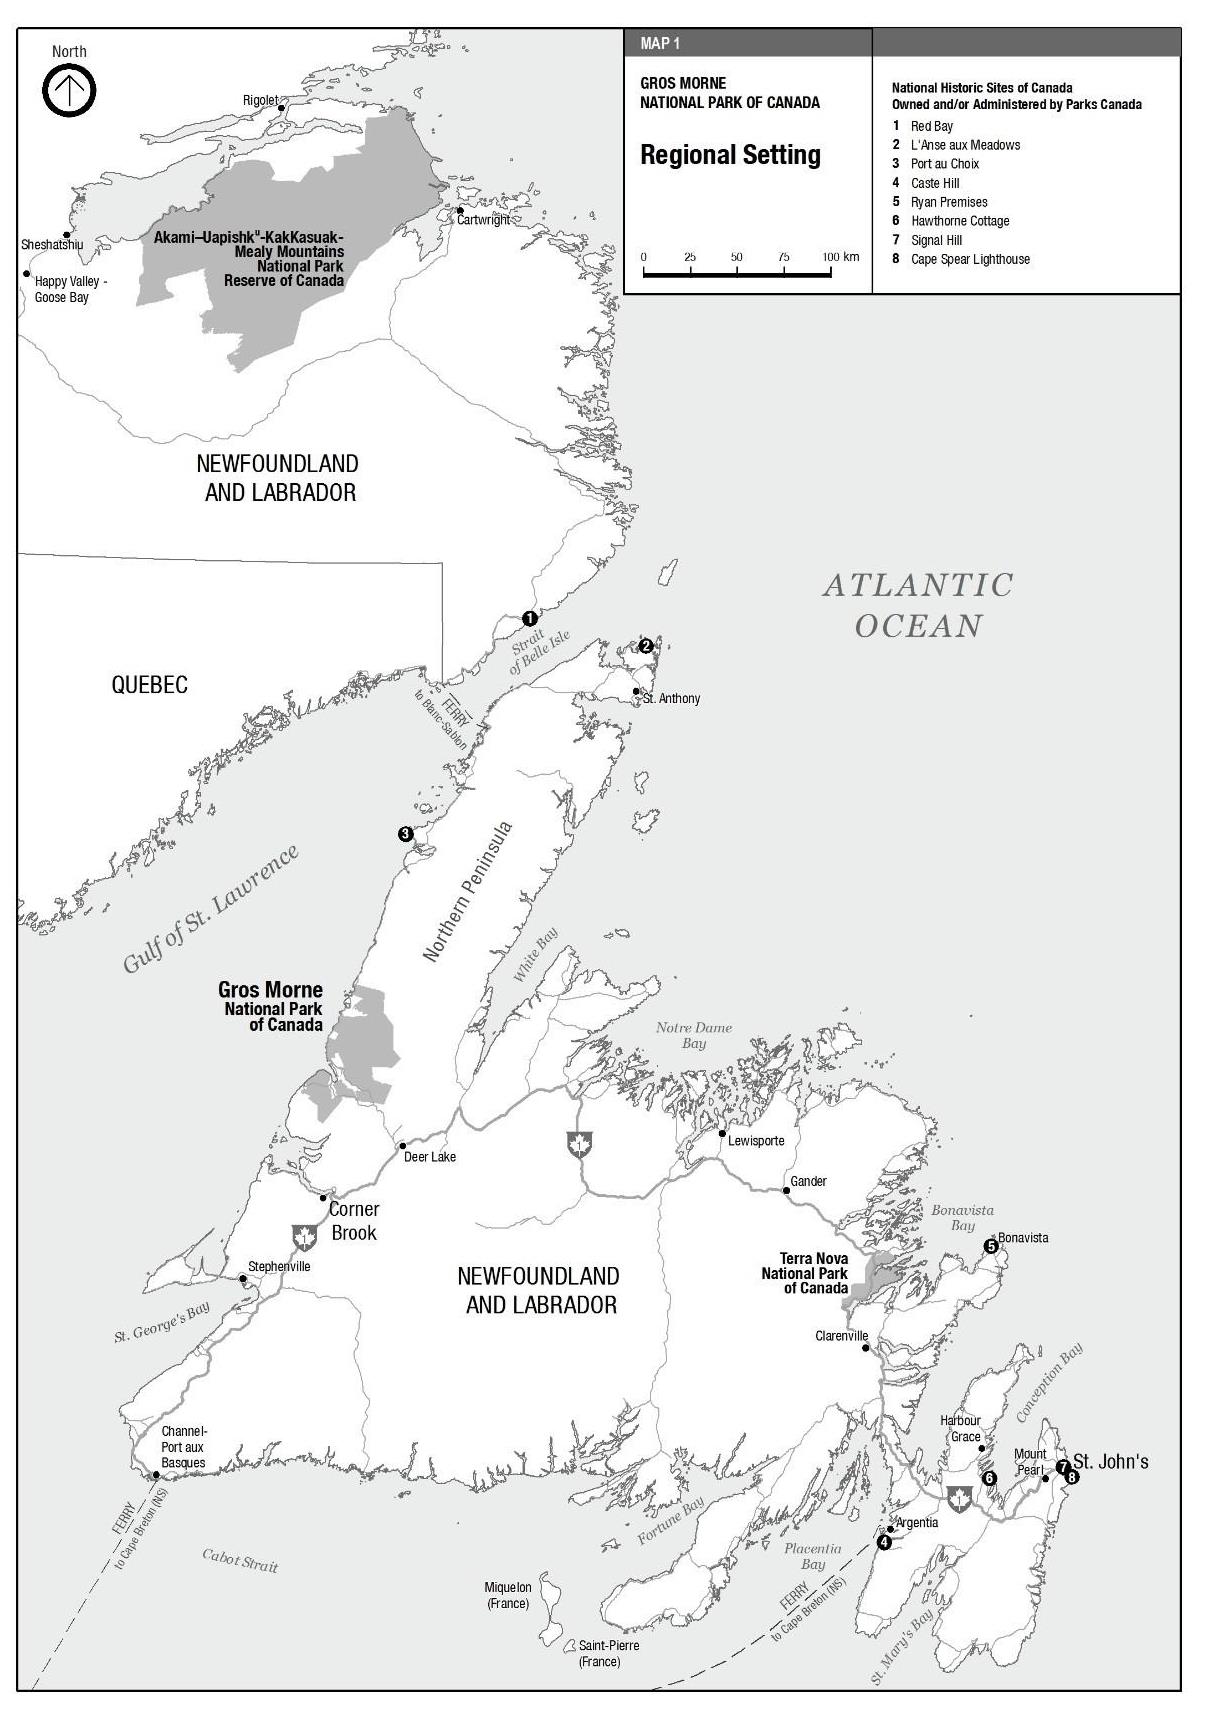 A map showing the regional setting of Gros Morne National Park